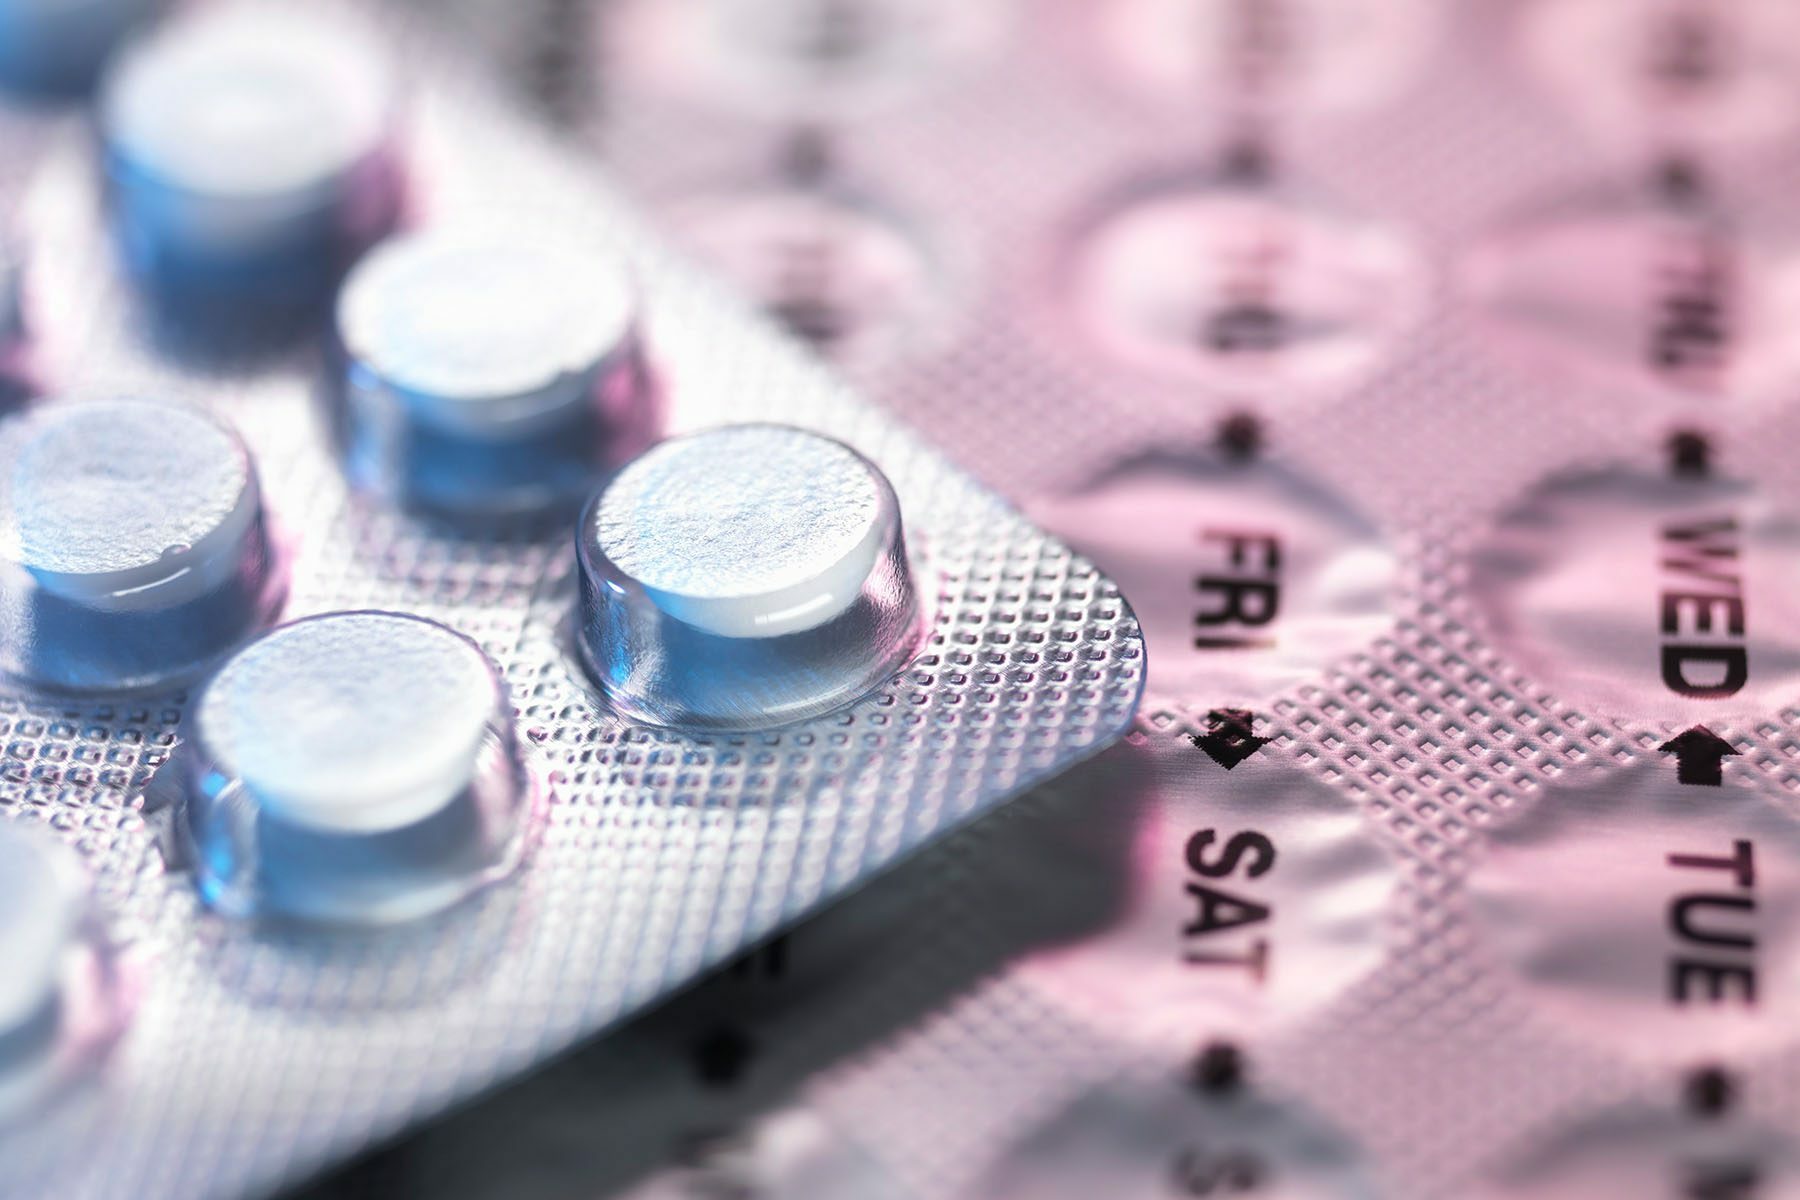 Macro detail of contraceptive pills